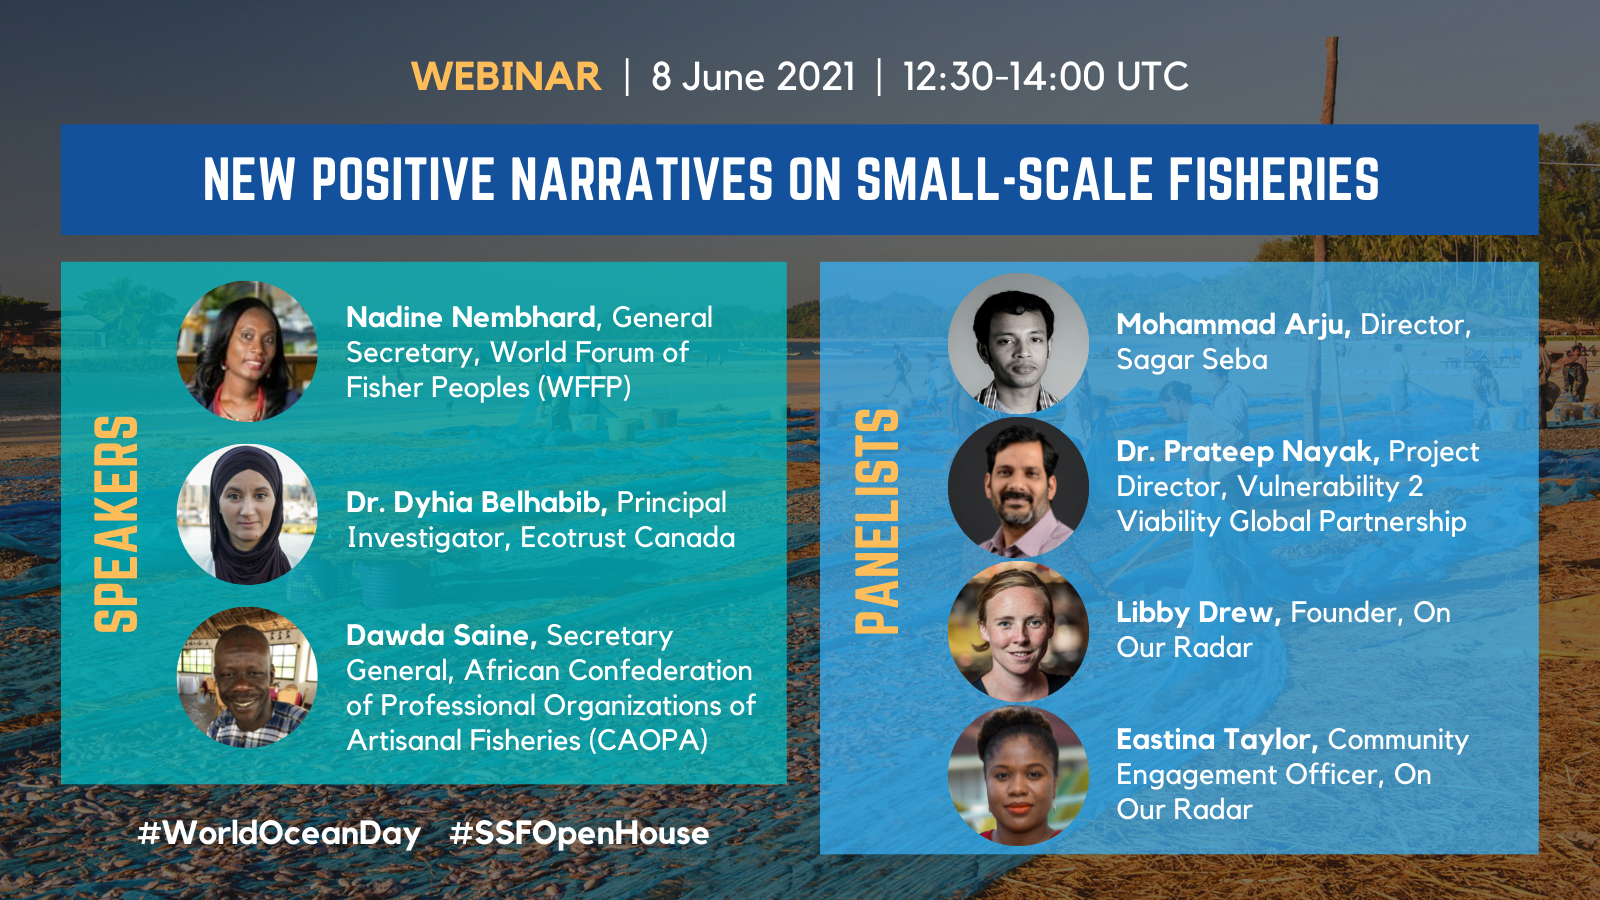 New positive narratives on small-scale fisheries